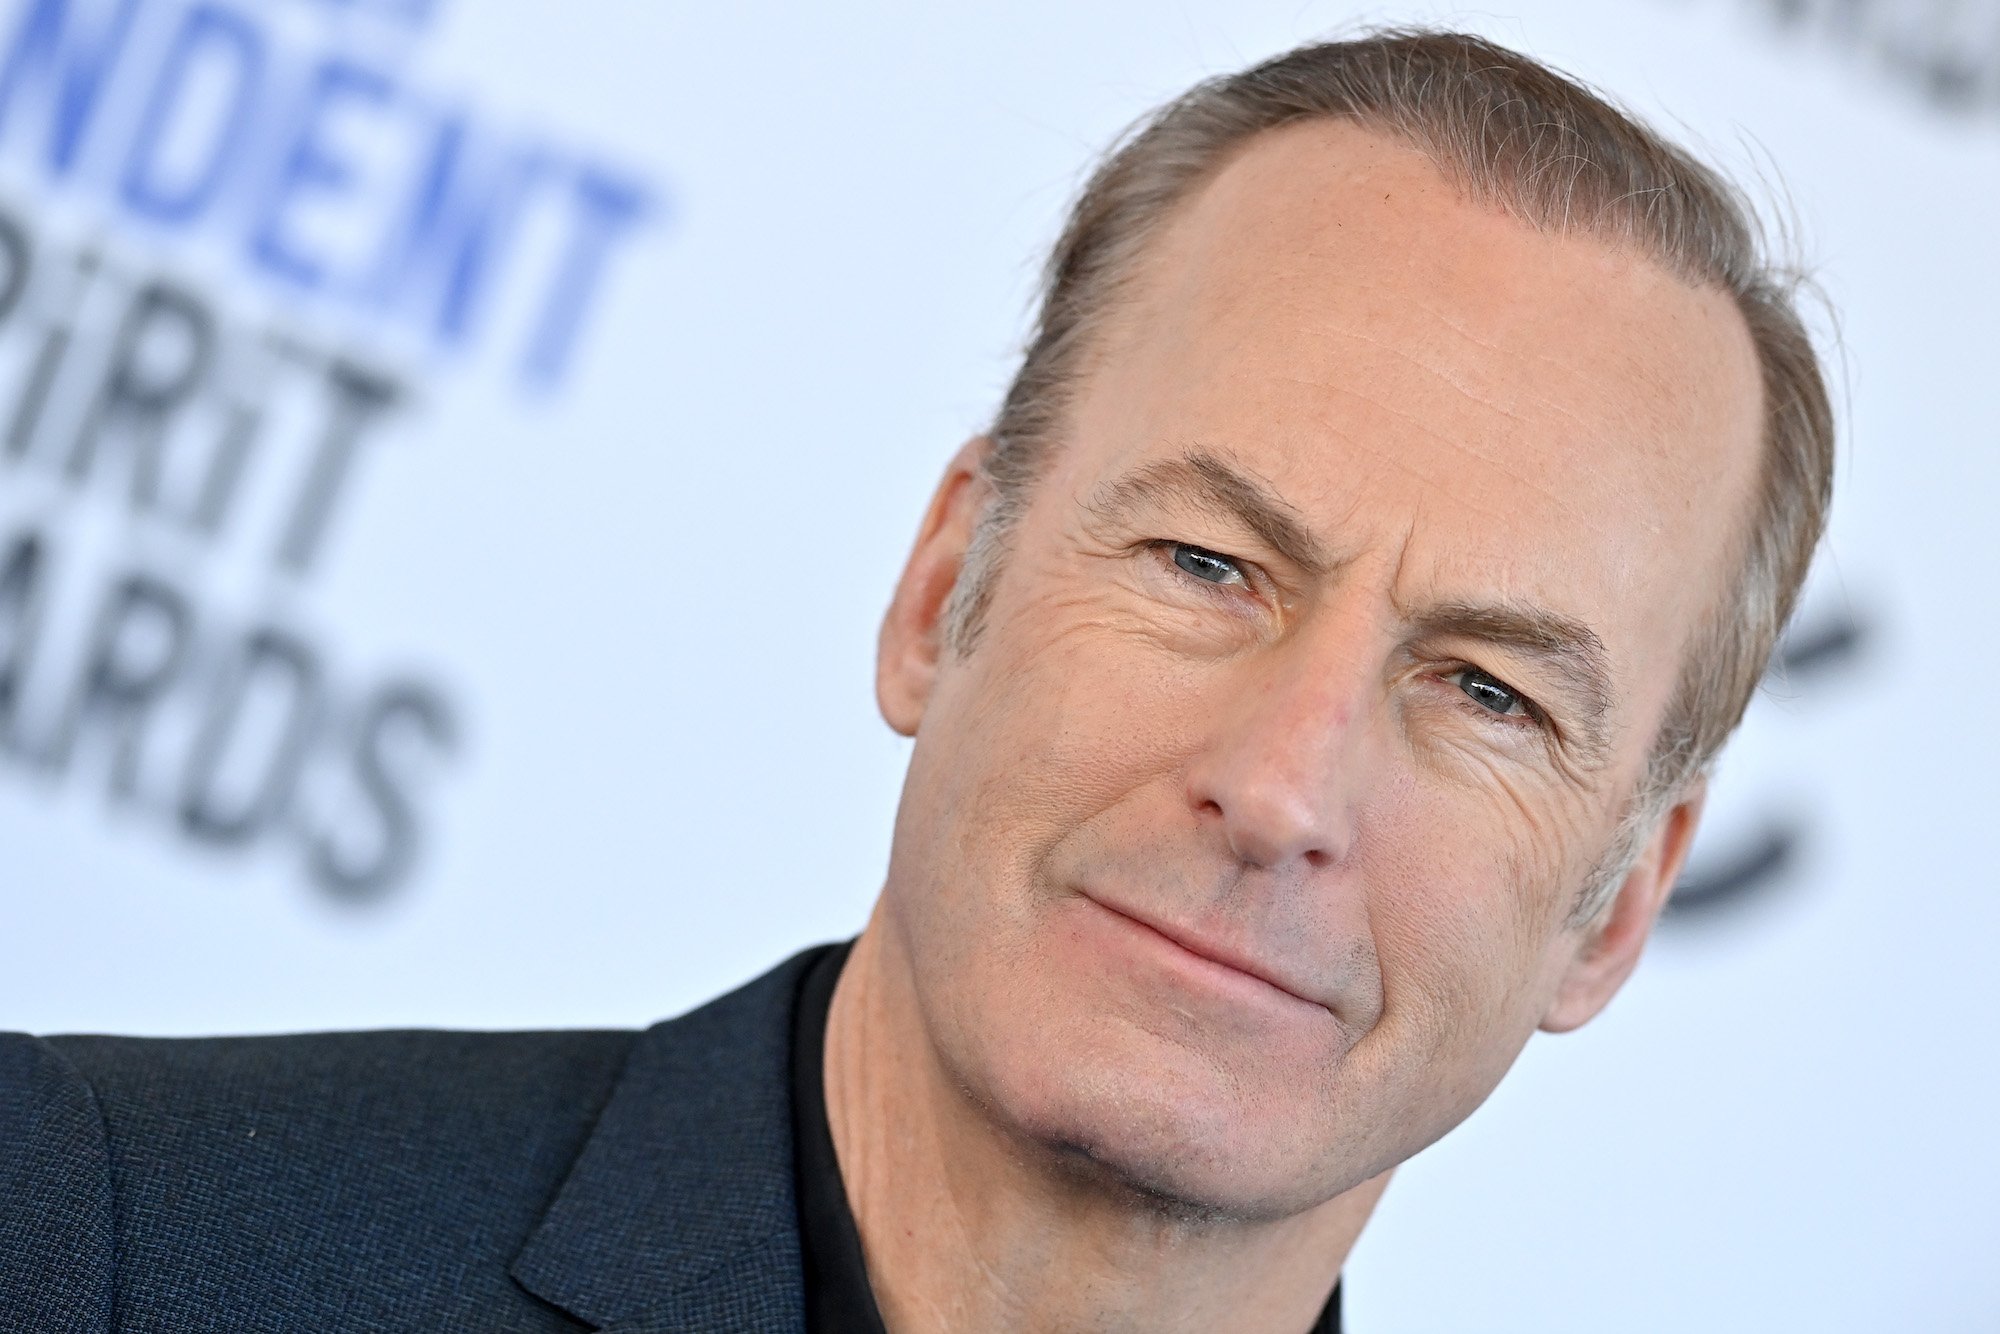 'Better Call Saul' star Bob Odenkirk smiles on the red carpet for the Independent Spirit Awards